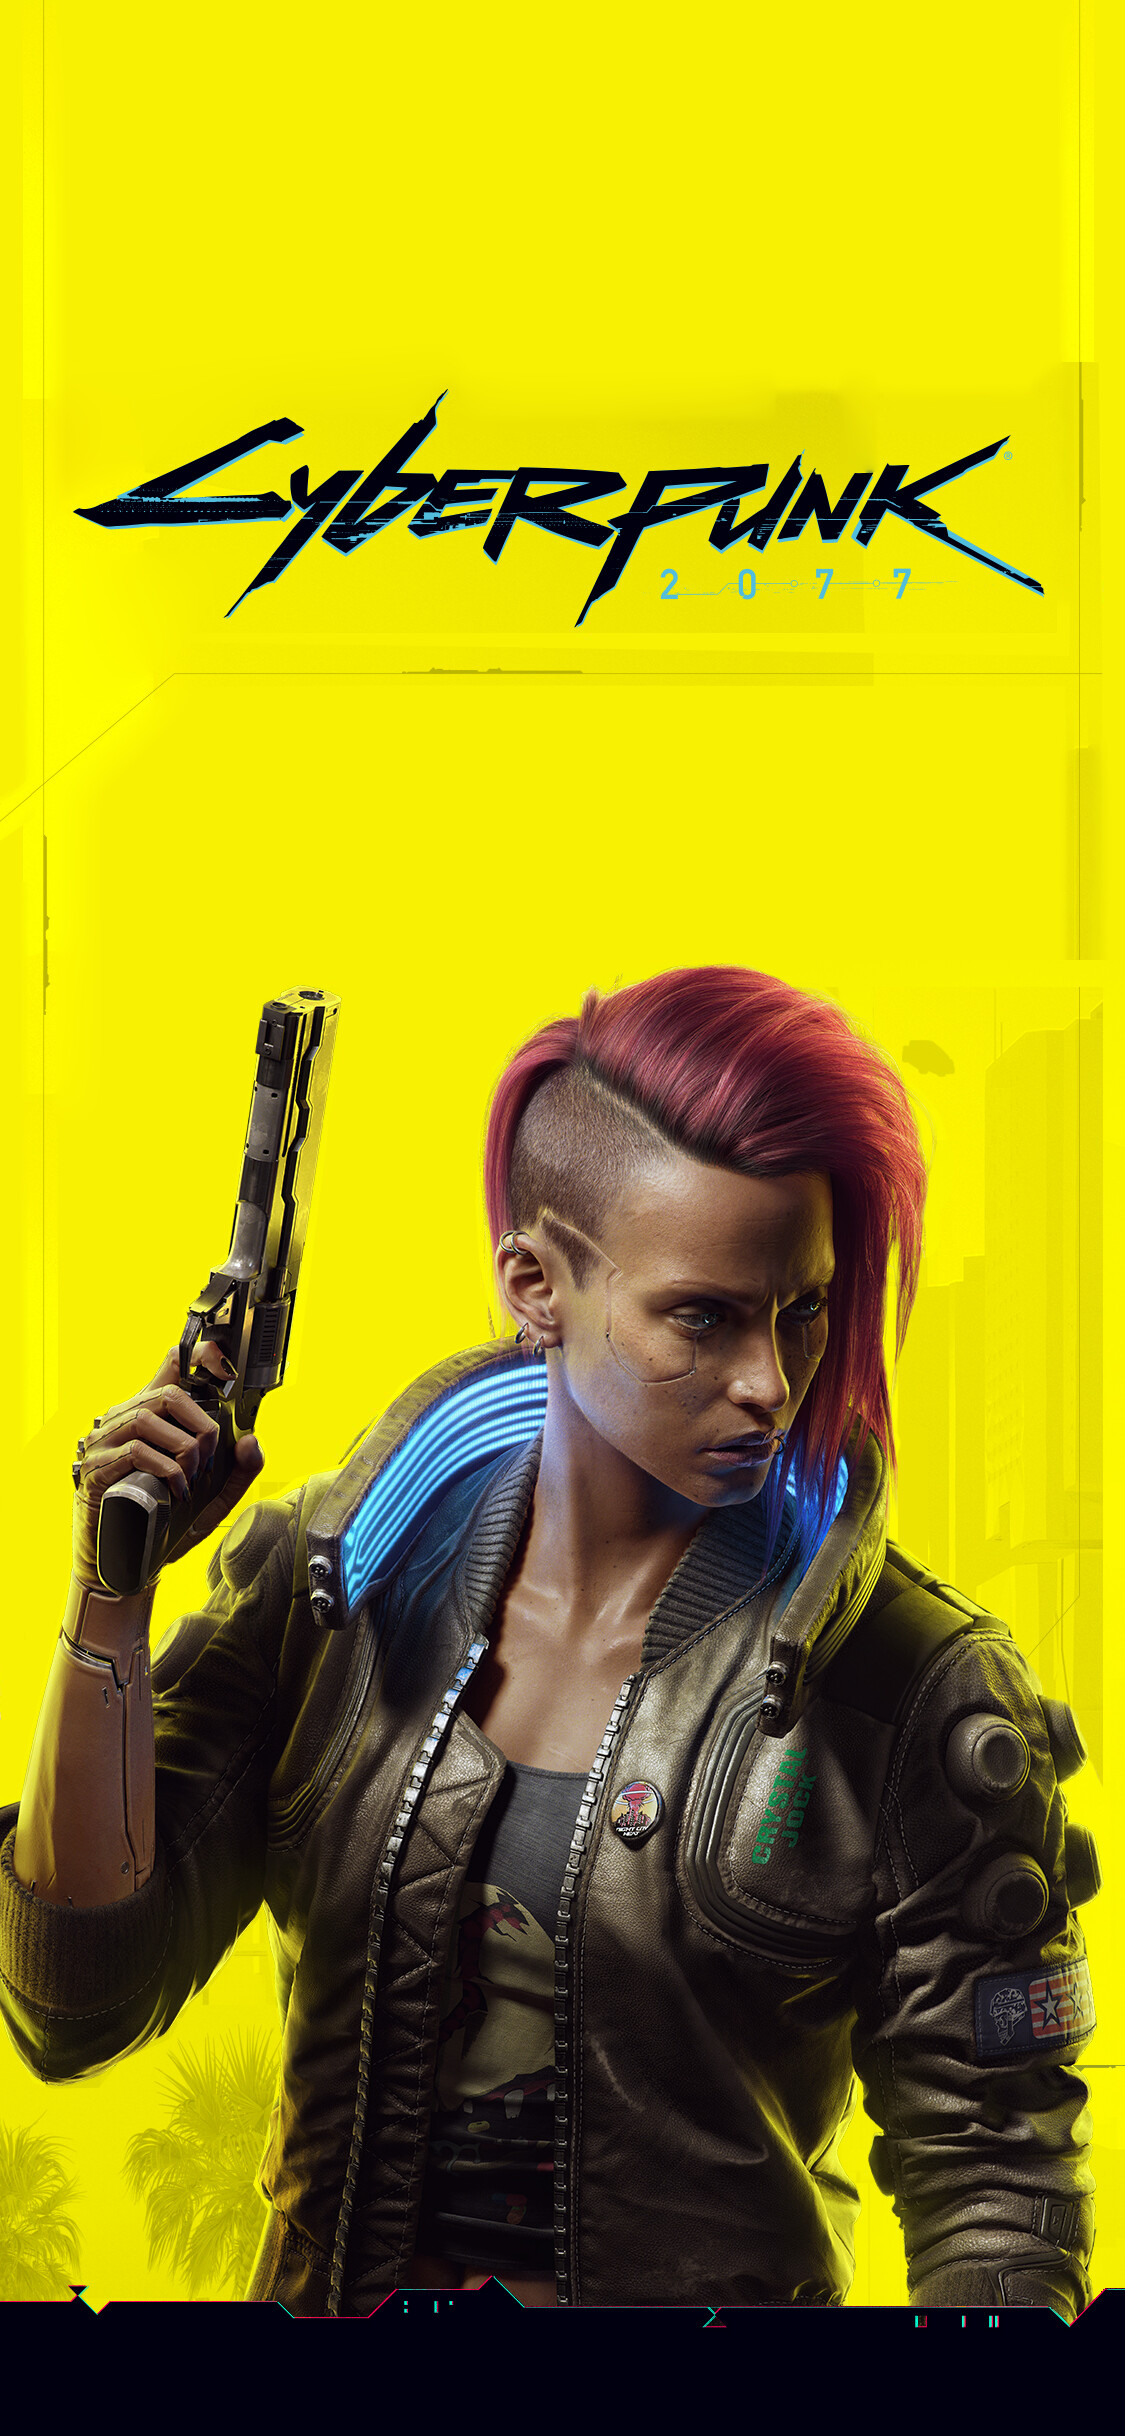 Cyberpunk 2077: Players can customize their character’s cyberware, skillset, and playstyle, and explore a vast city where the choices they make shape the story and the world around them. 1130x2440 HD Wallpaper.